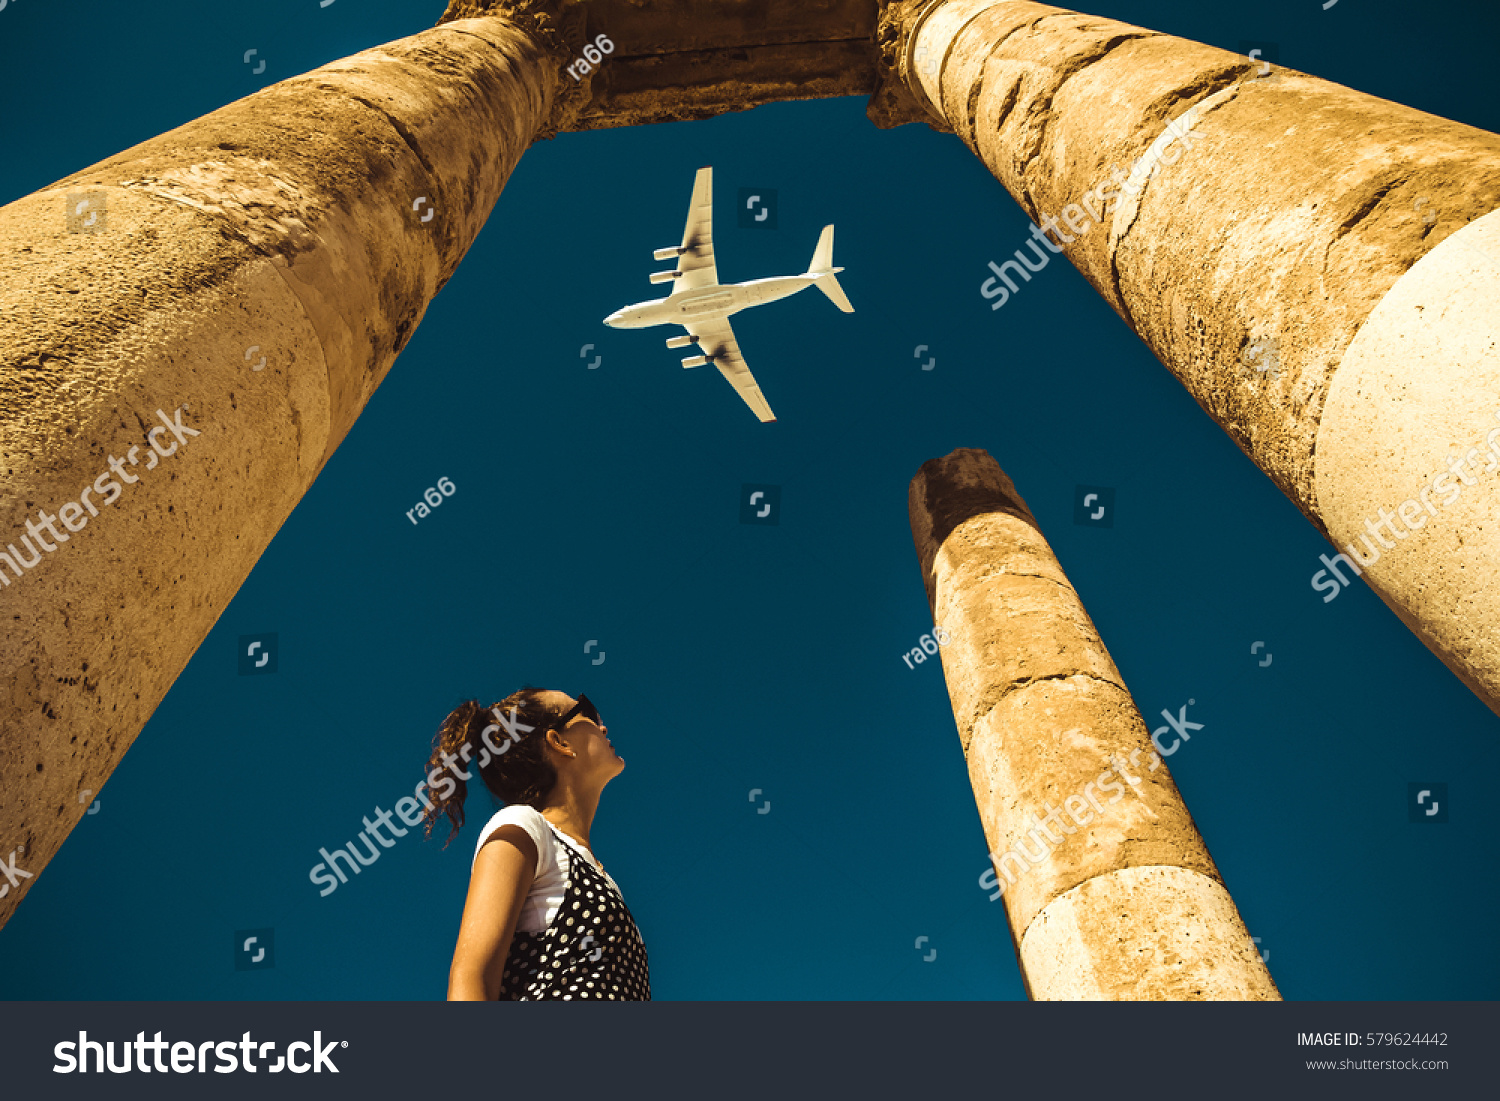  Young woman look at airplane dreaming about vacation. Explore the world. Export concept. Time to travel. Freedom life. Independent person. Tourism and transportation industry. Spirit of adventure. #579624442